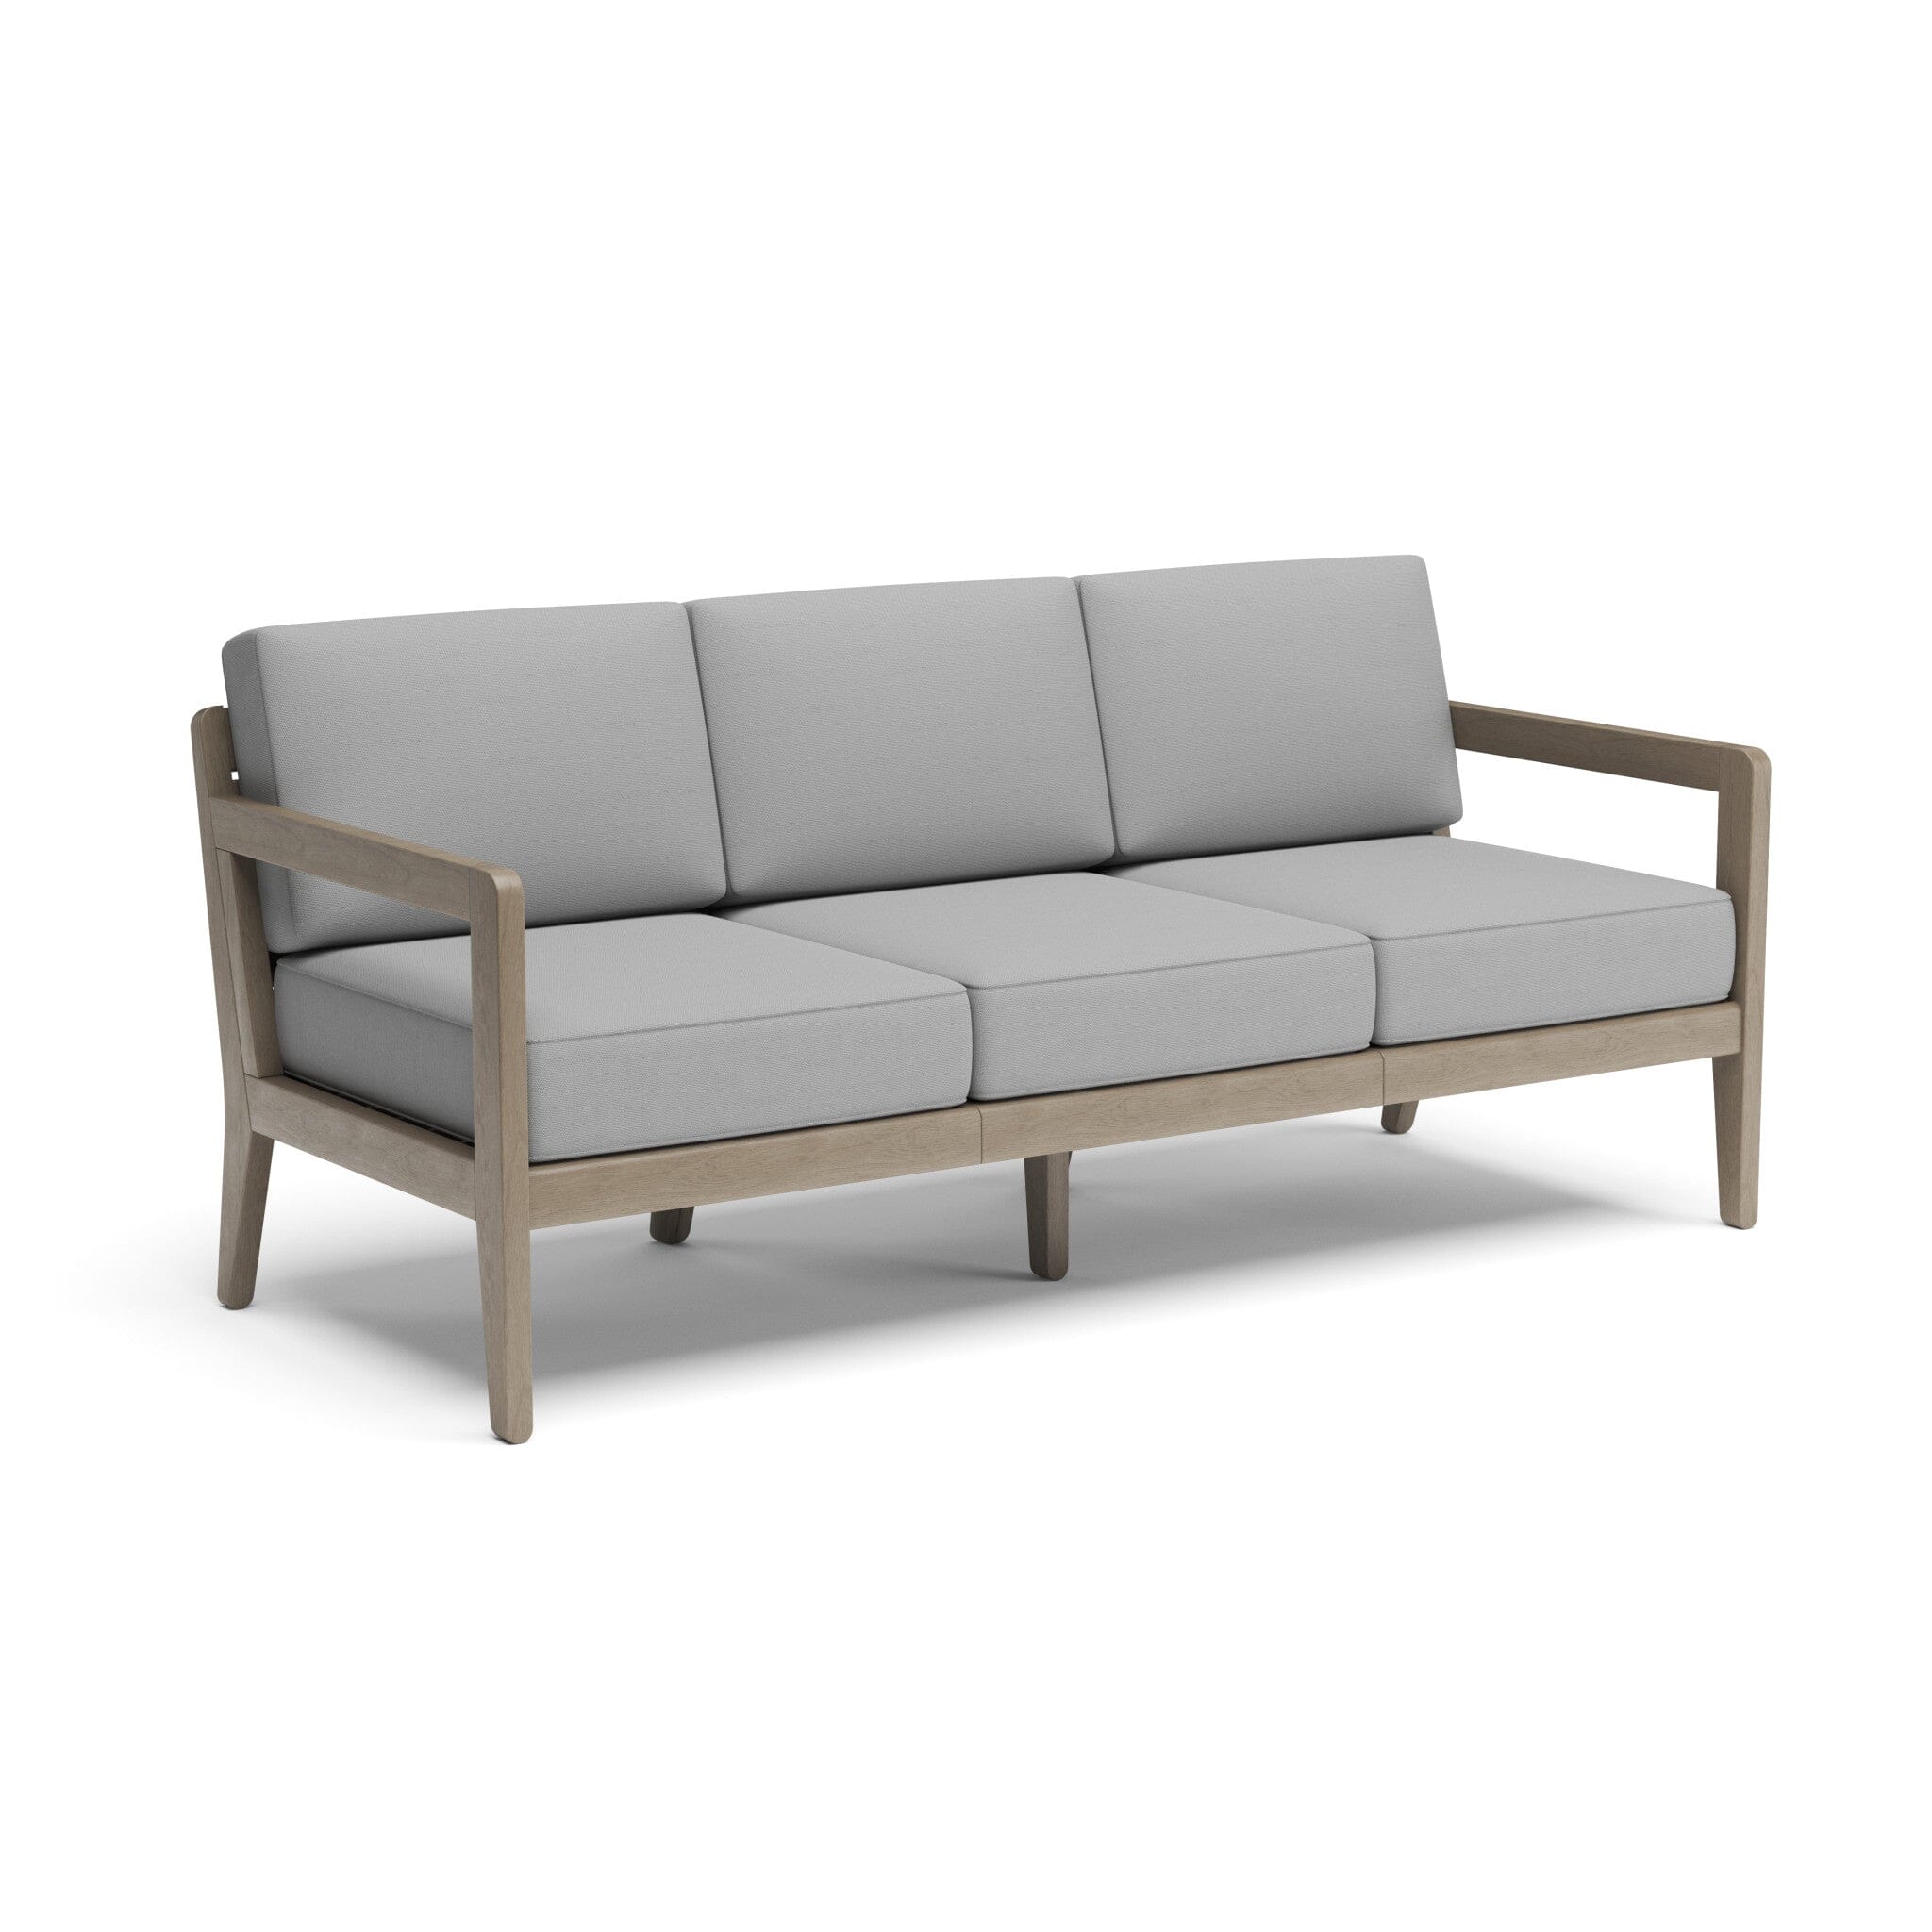 Transitional Outdoor Sofa By Sustain Sofa Sustain